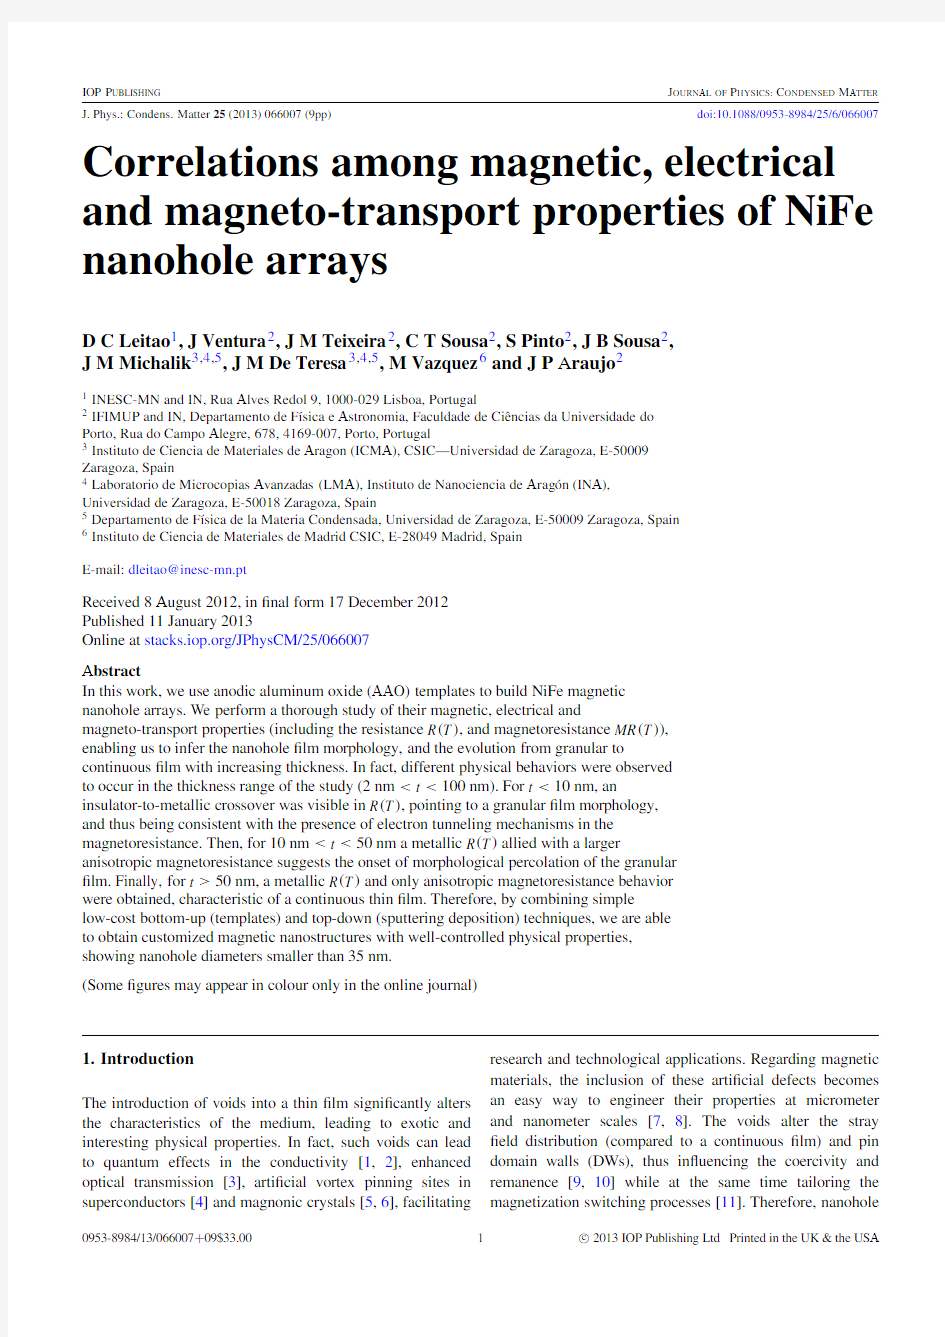 Correlations among magnetic, electrical and magneto-transport properties of NiFe nanohole arrays